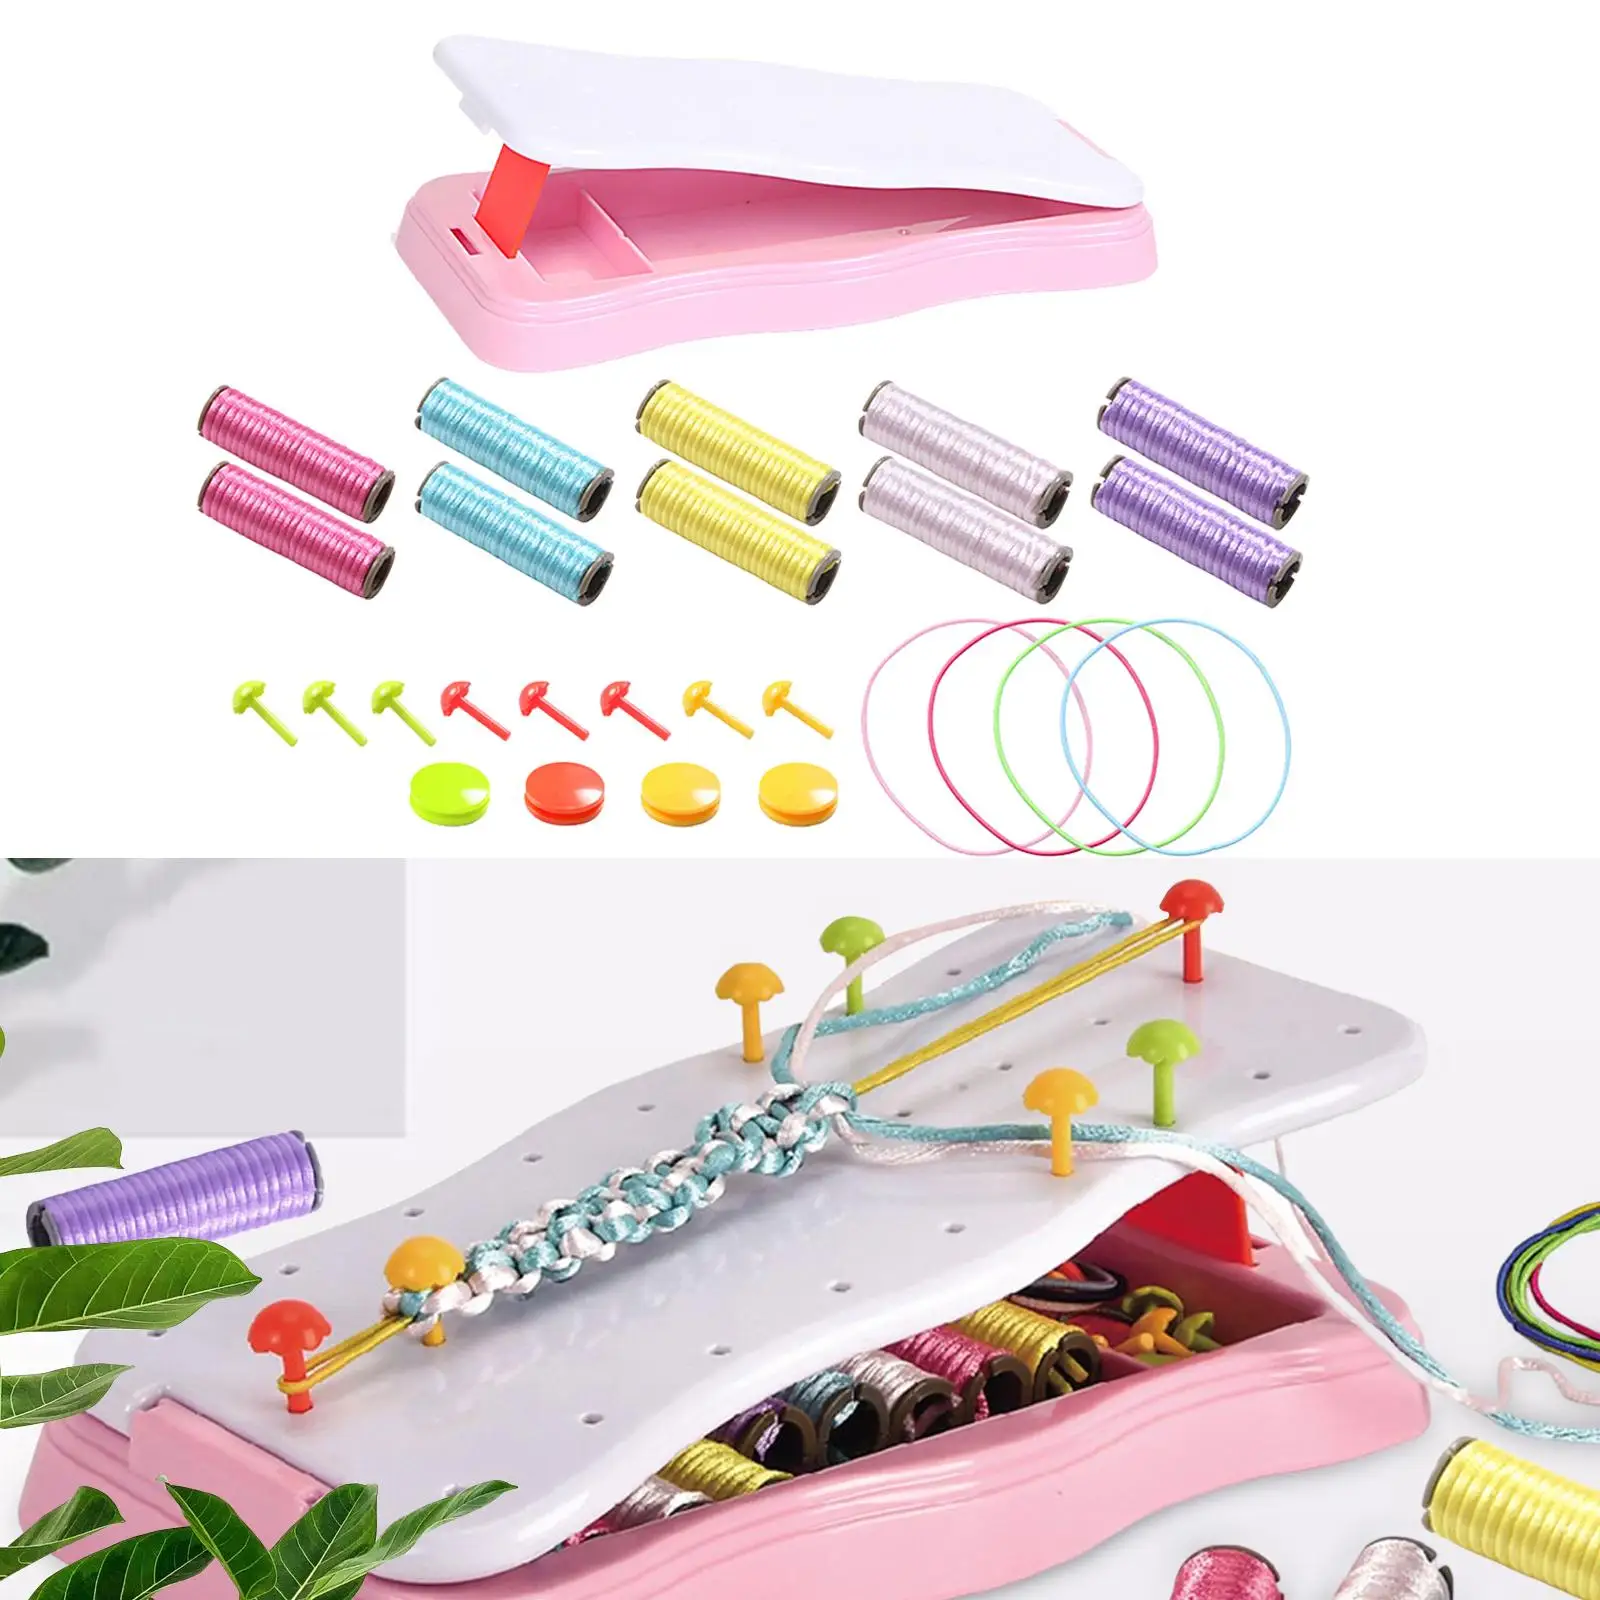 Bracelet Making Set Crafts Colorful for Girls Birthday Gifts Travel Activity